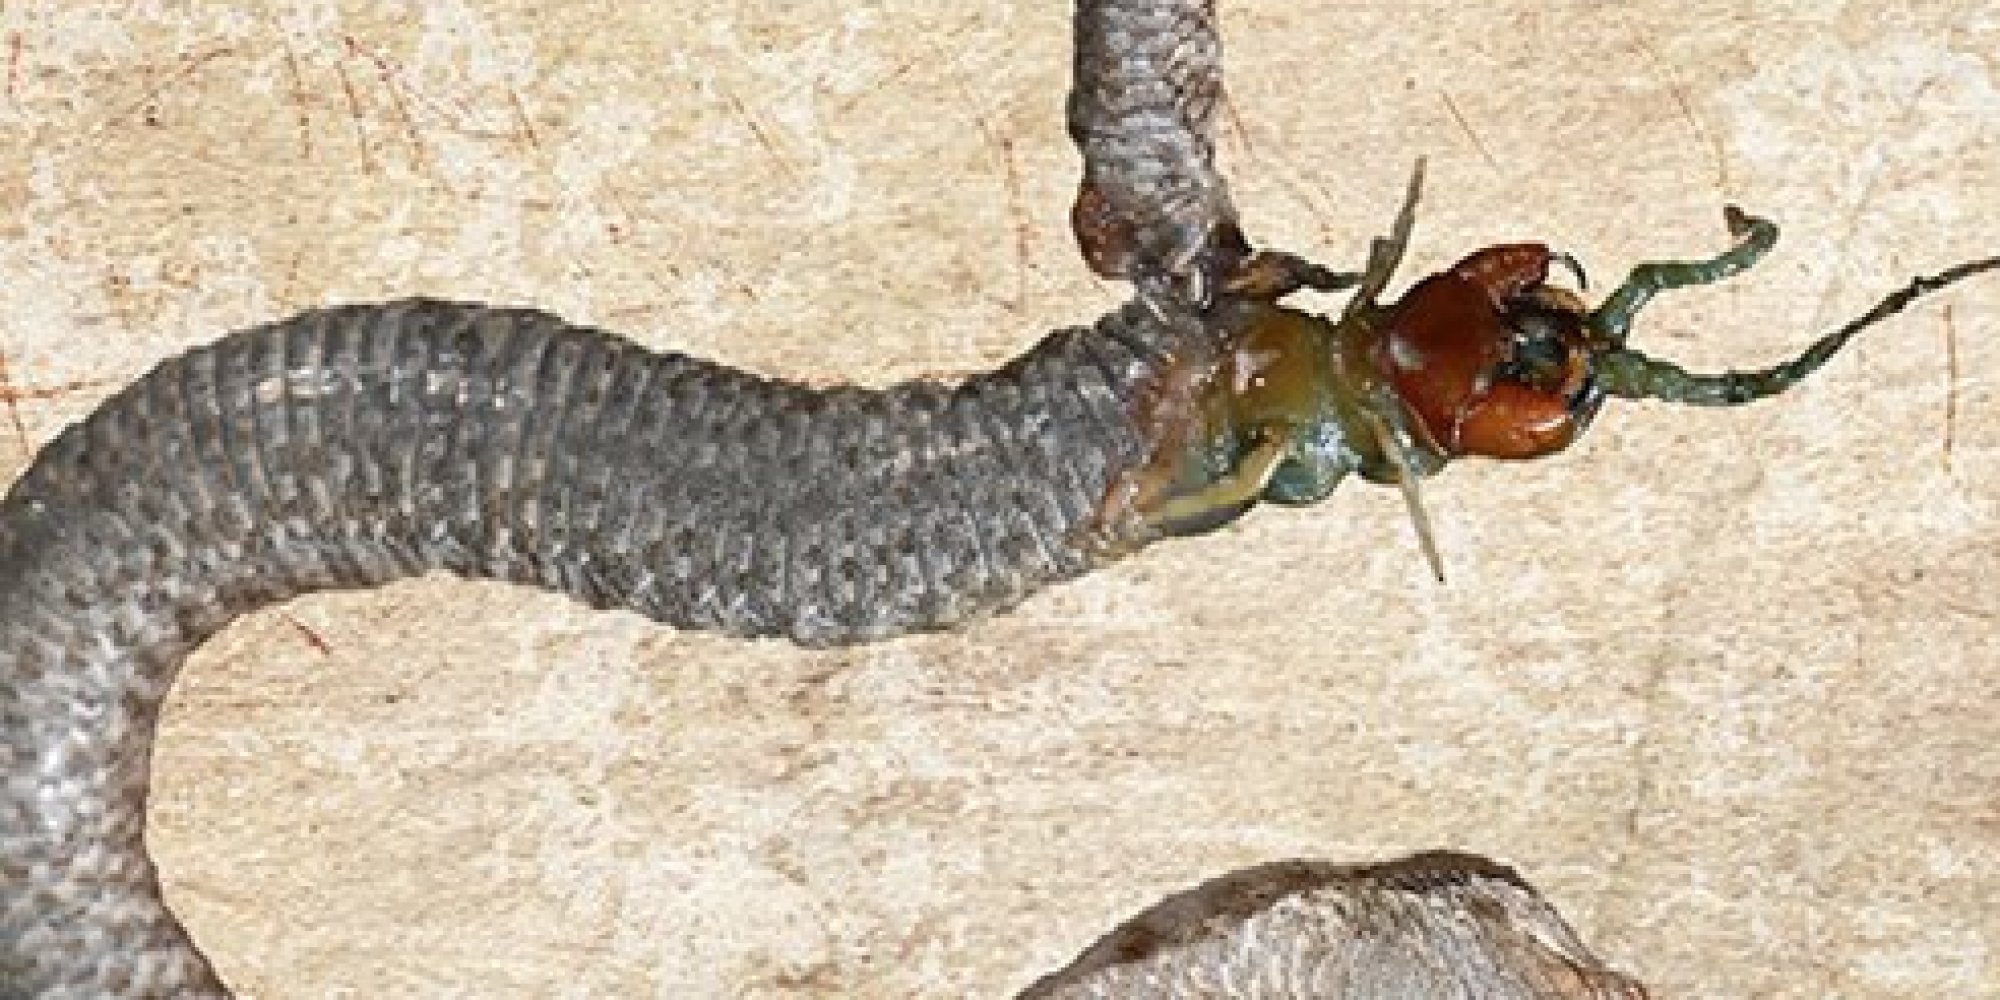 Centipede Eats Its Way Out Of Snake | HuffPost